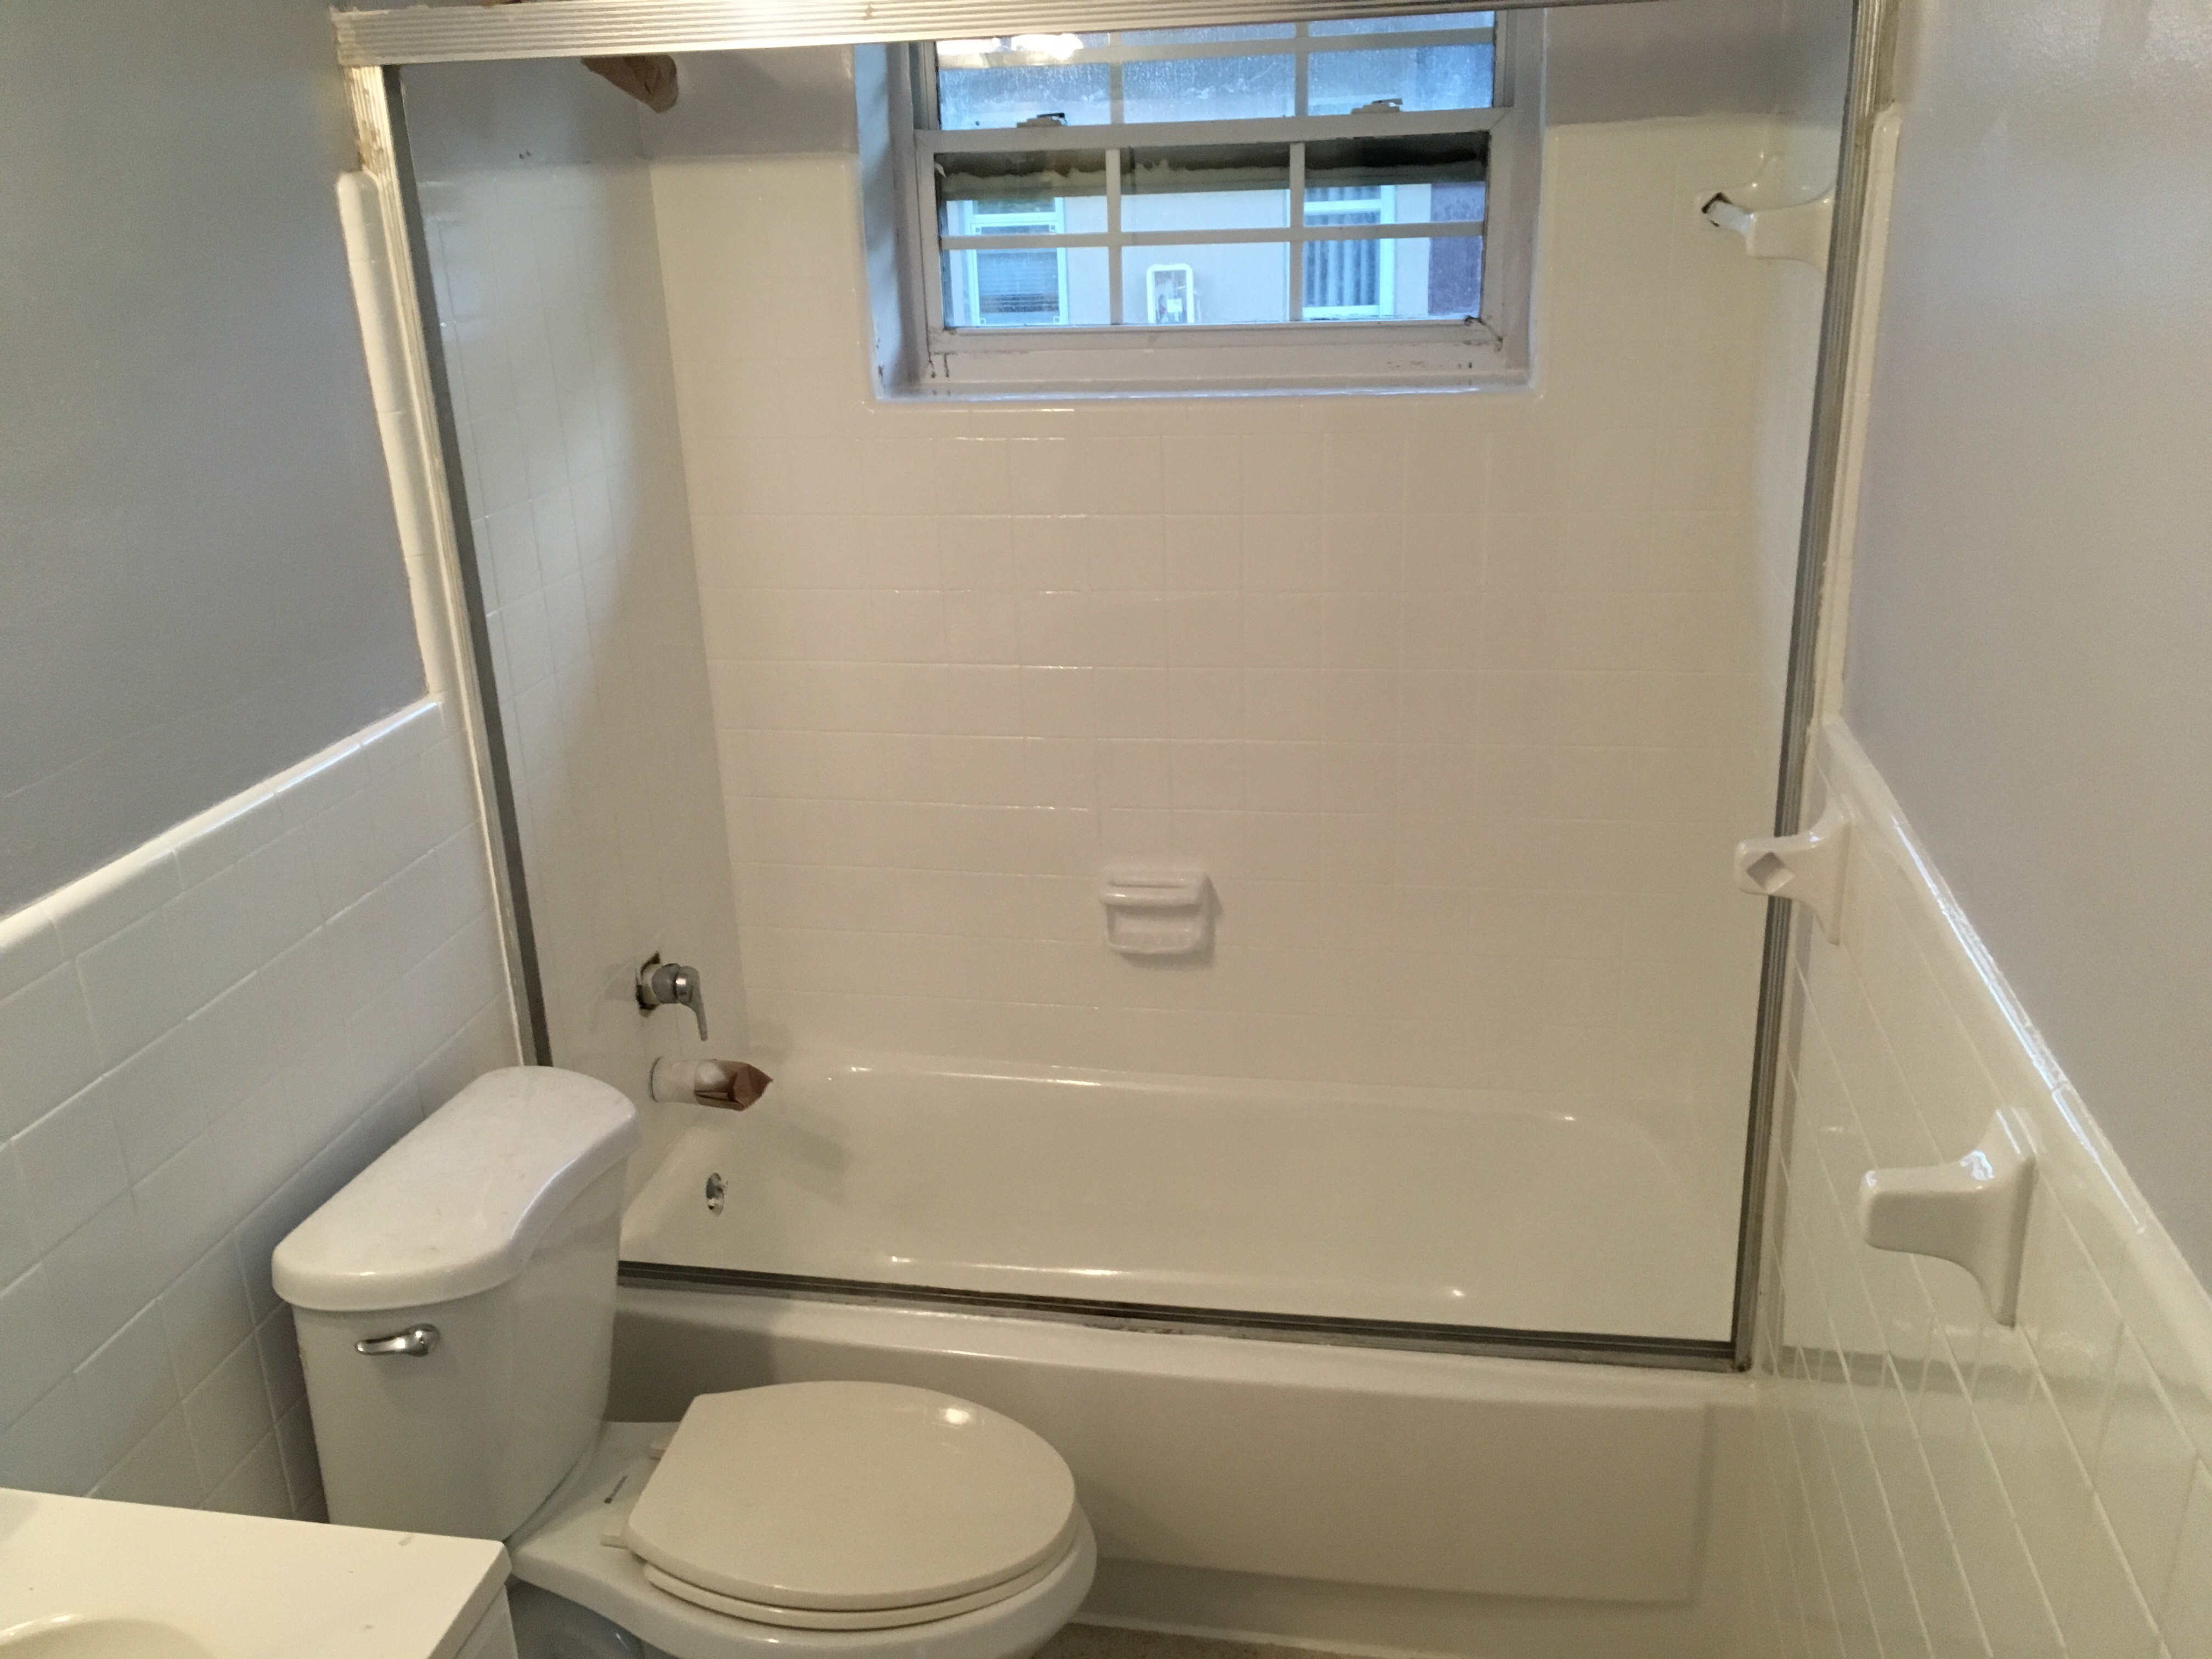 CE Bathtub Refinishing , Wednesday, March 20, 2019, Press release picture